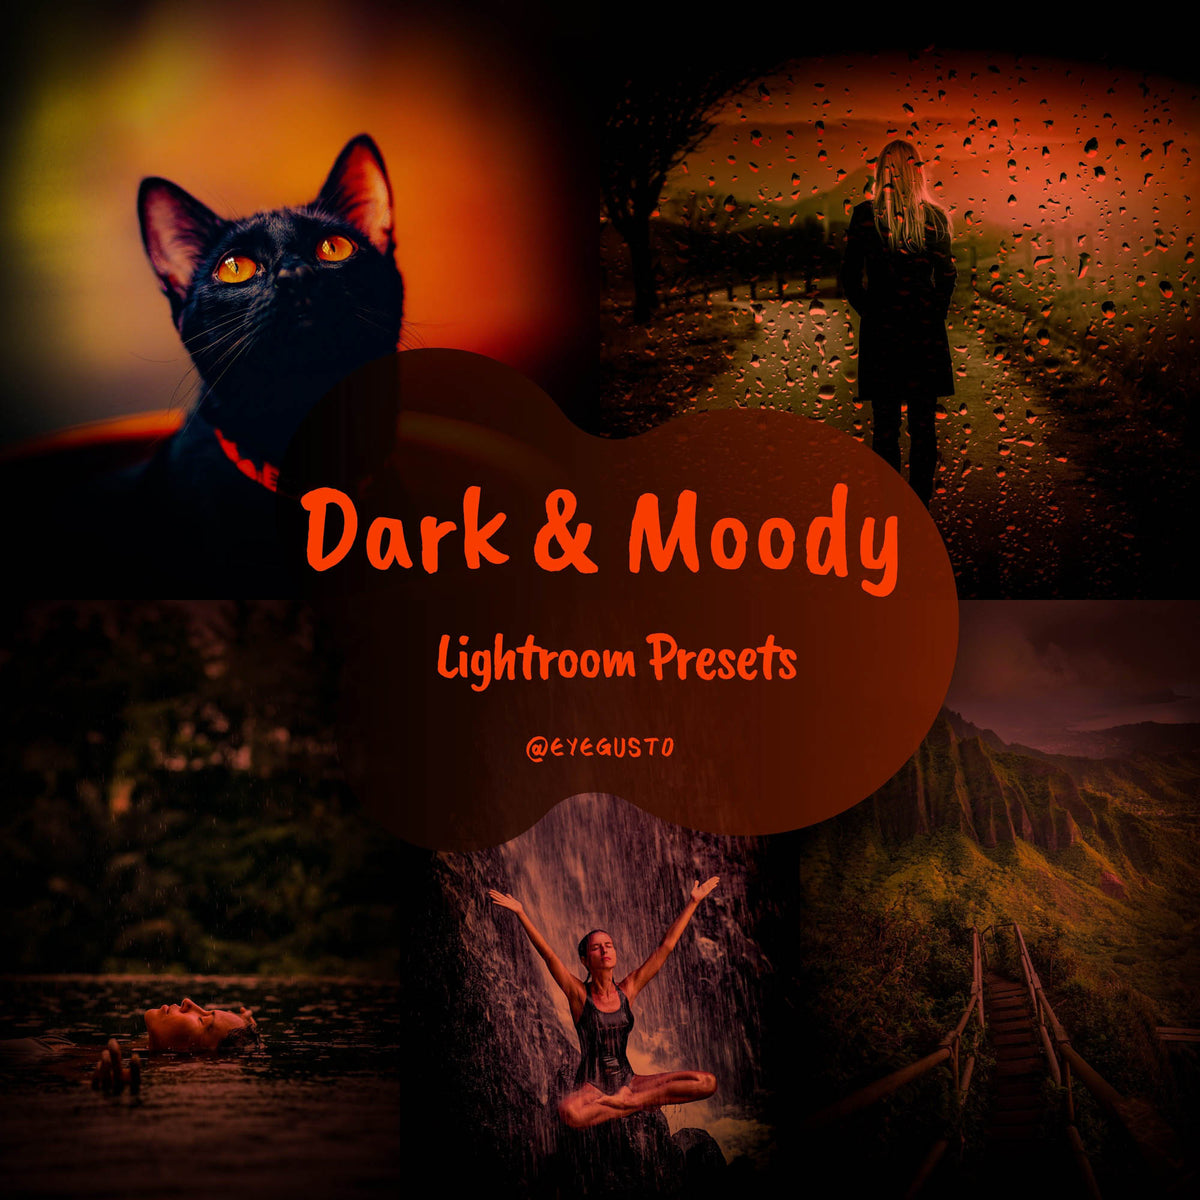 Dark and Moody Presets for Lightroom and Instagram